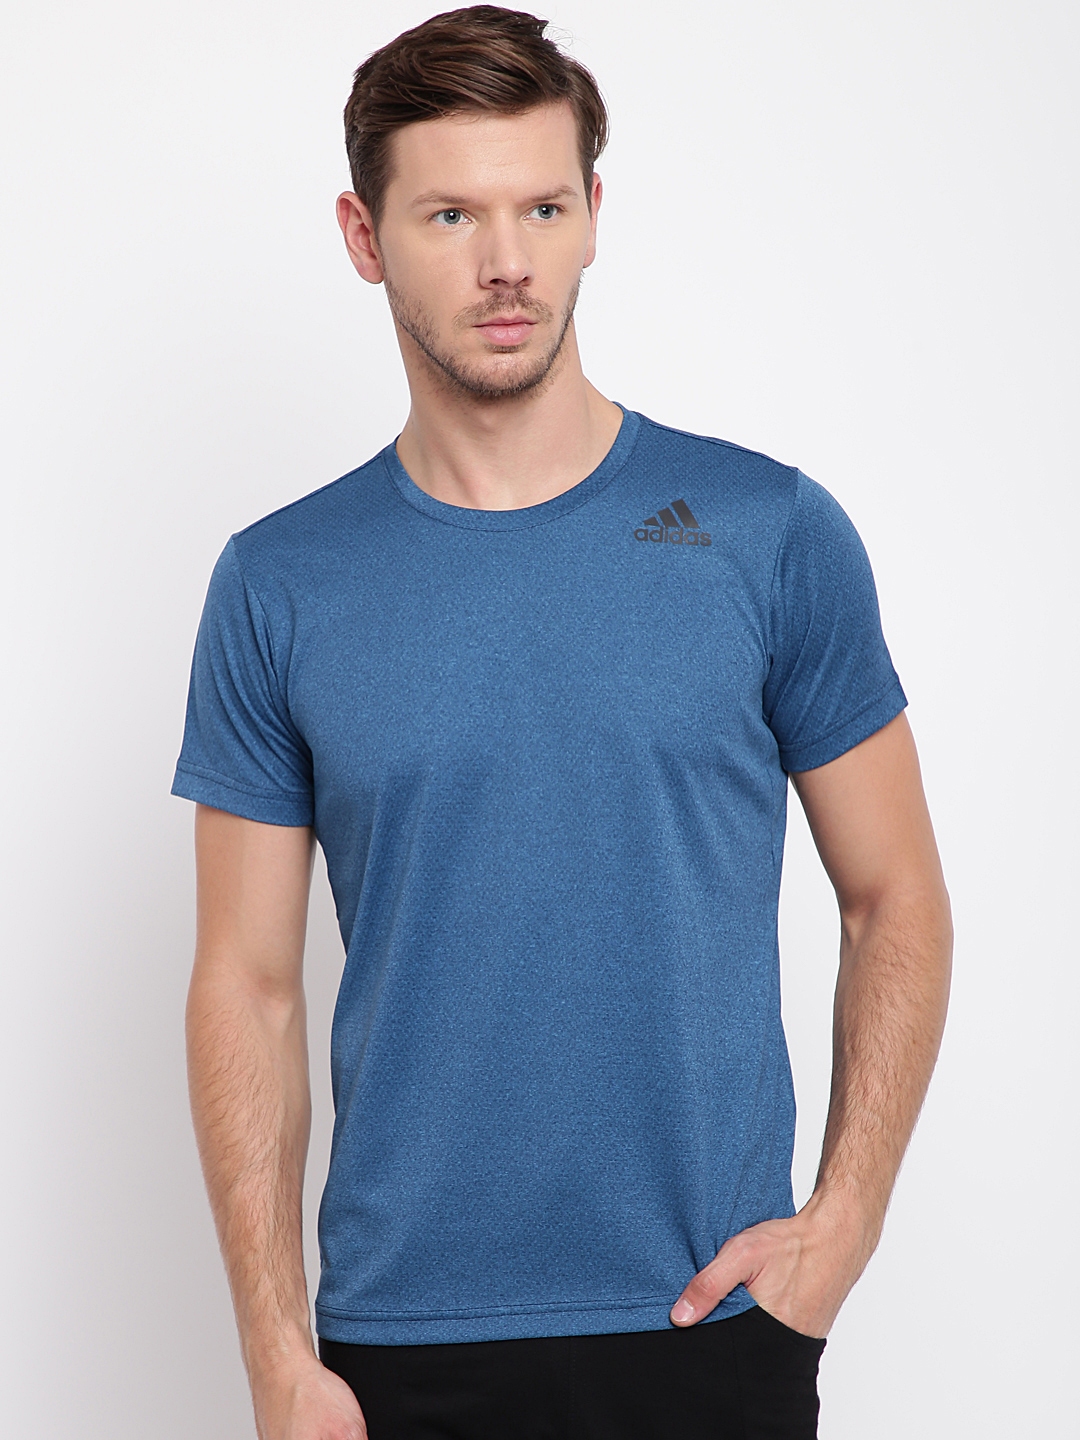 Buy ADIDAS Men Teal Blue Freelift Climalite Solid Round Neck Training T ...